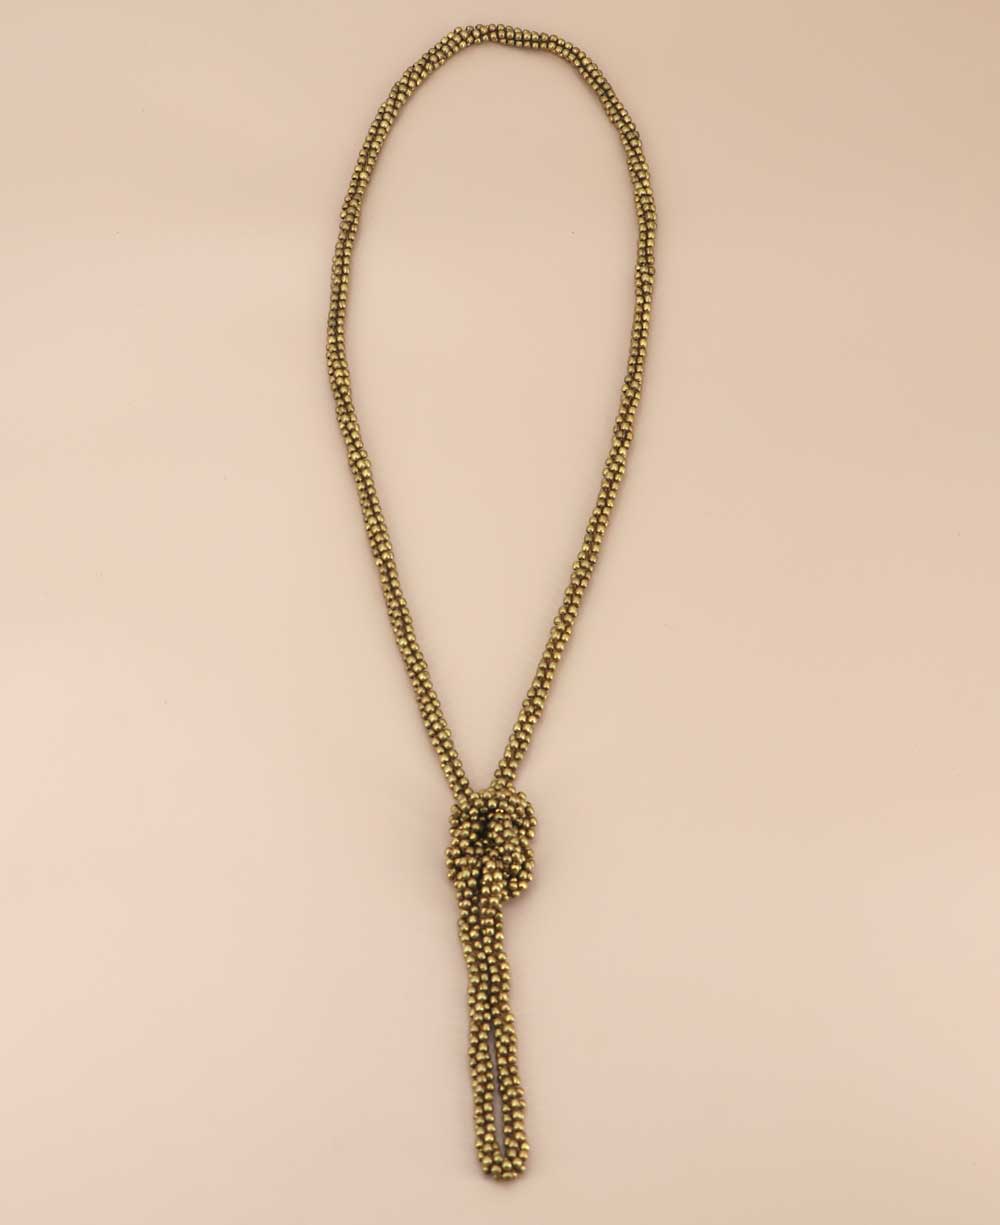 Handmade long strand antique gold necklace from Nepal